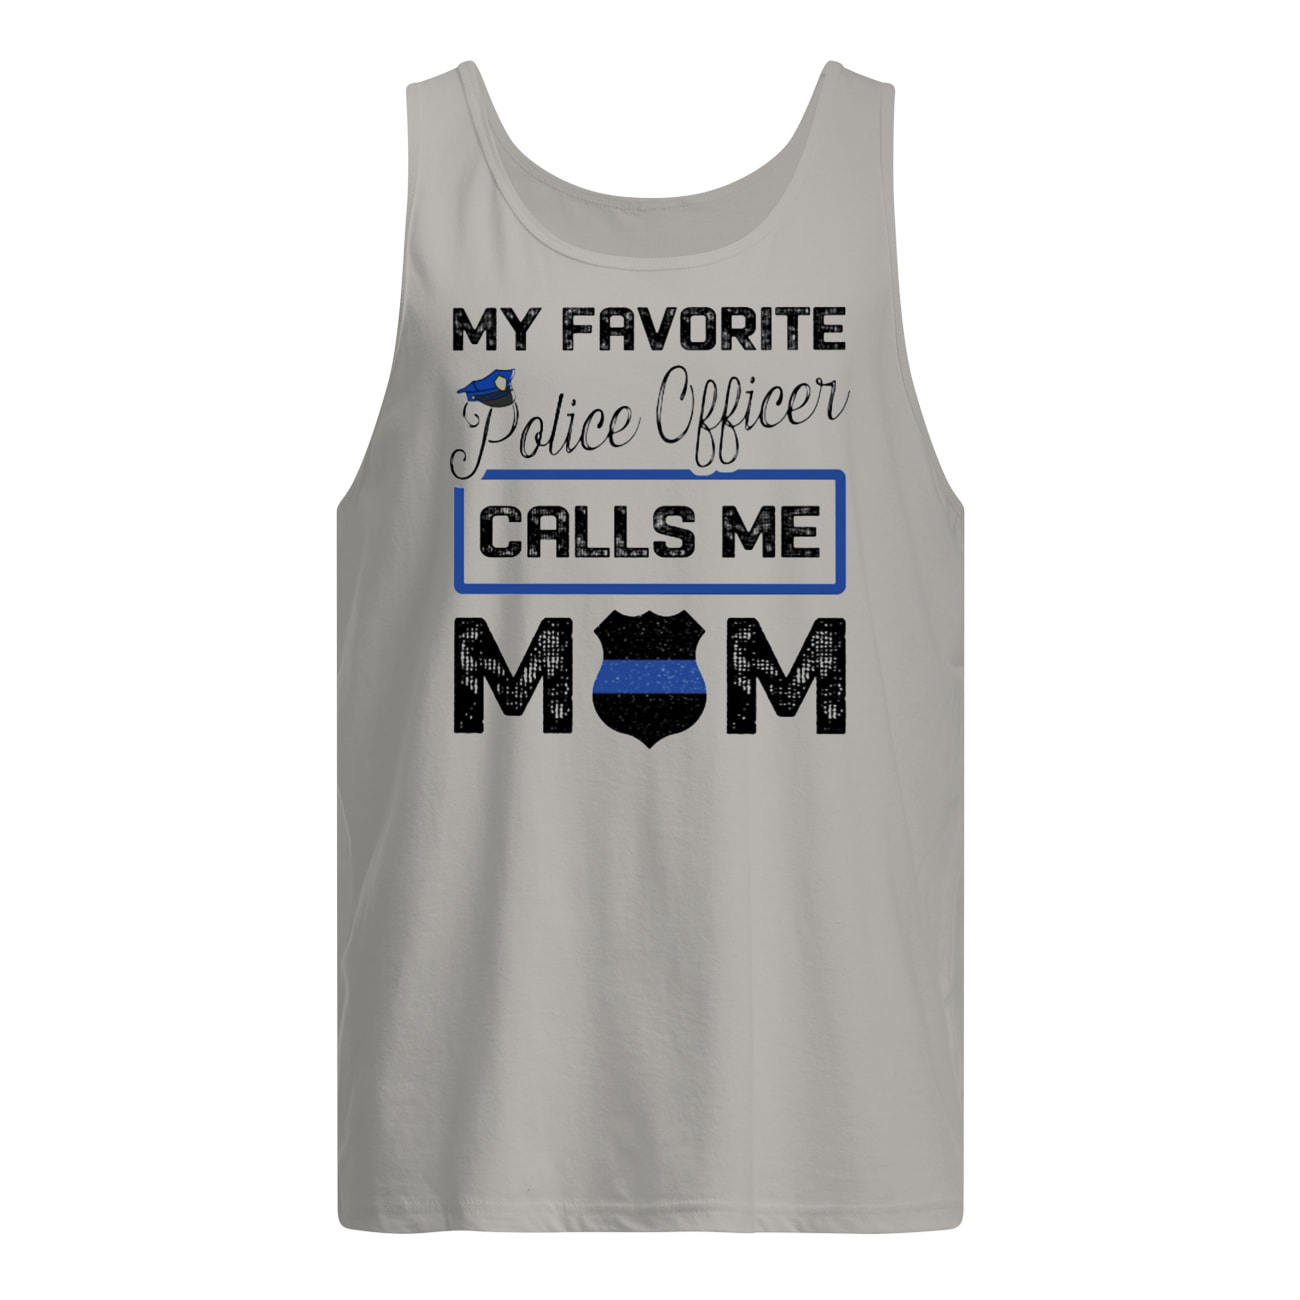 My favorite police officer calls me mom tank top